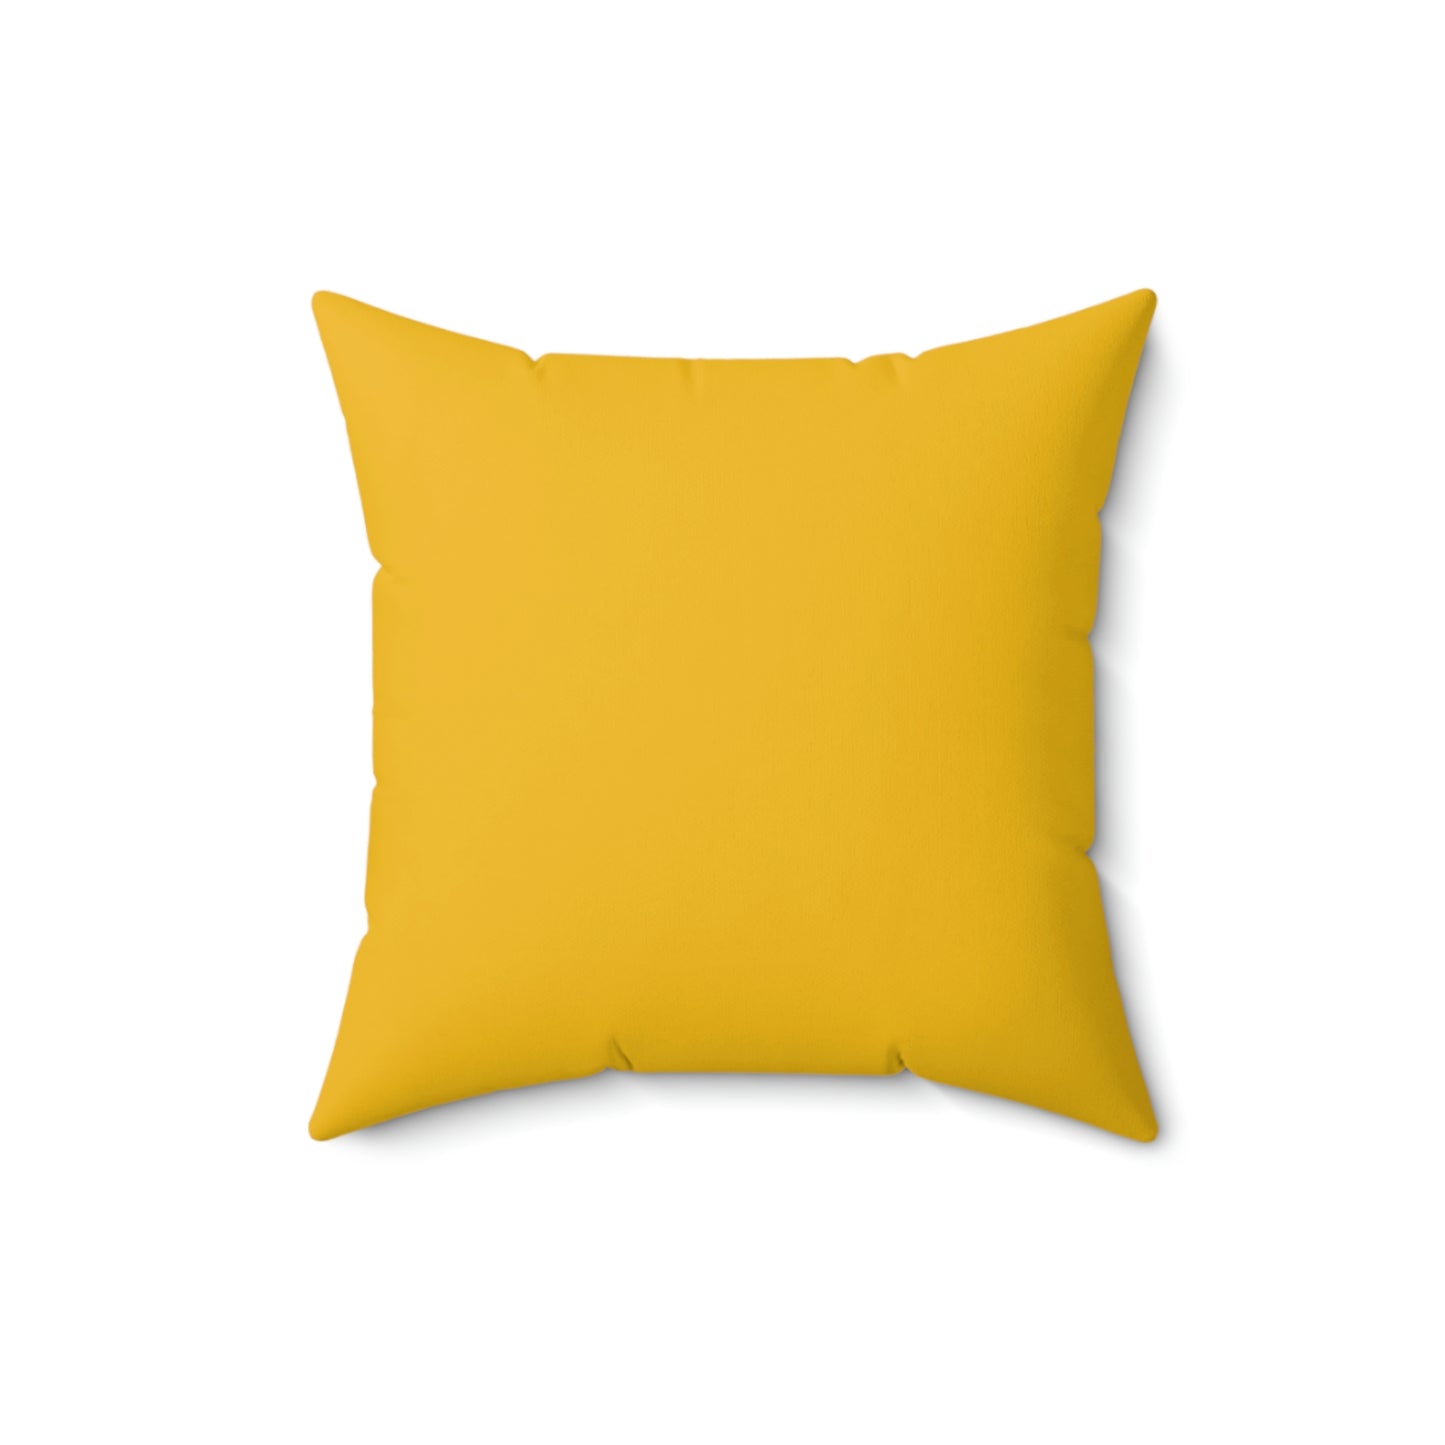 Spun Polyester Square Pillow Case "I am a Mom on Yellow”